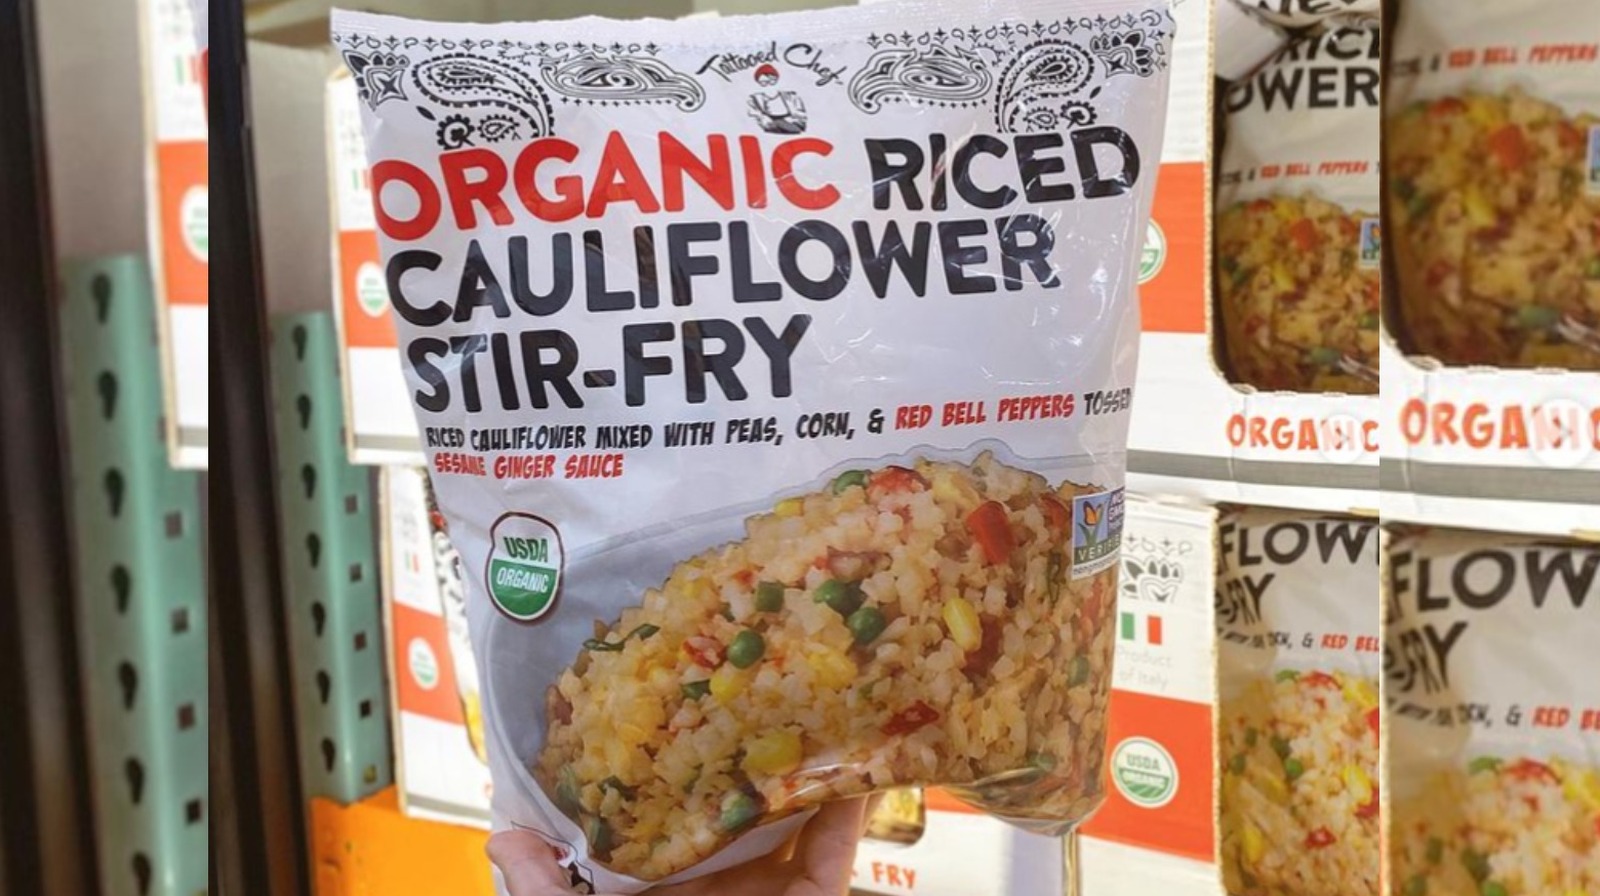 Costco Fans Can't Get Enough Of This Cauliflower Rice Stir-Fry